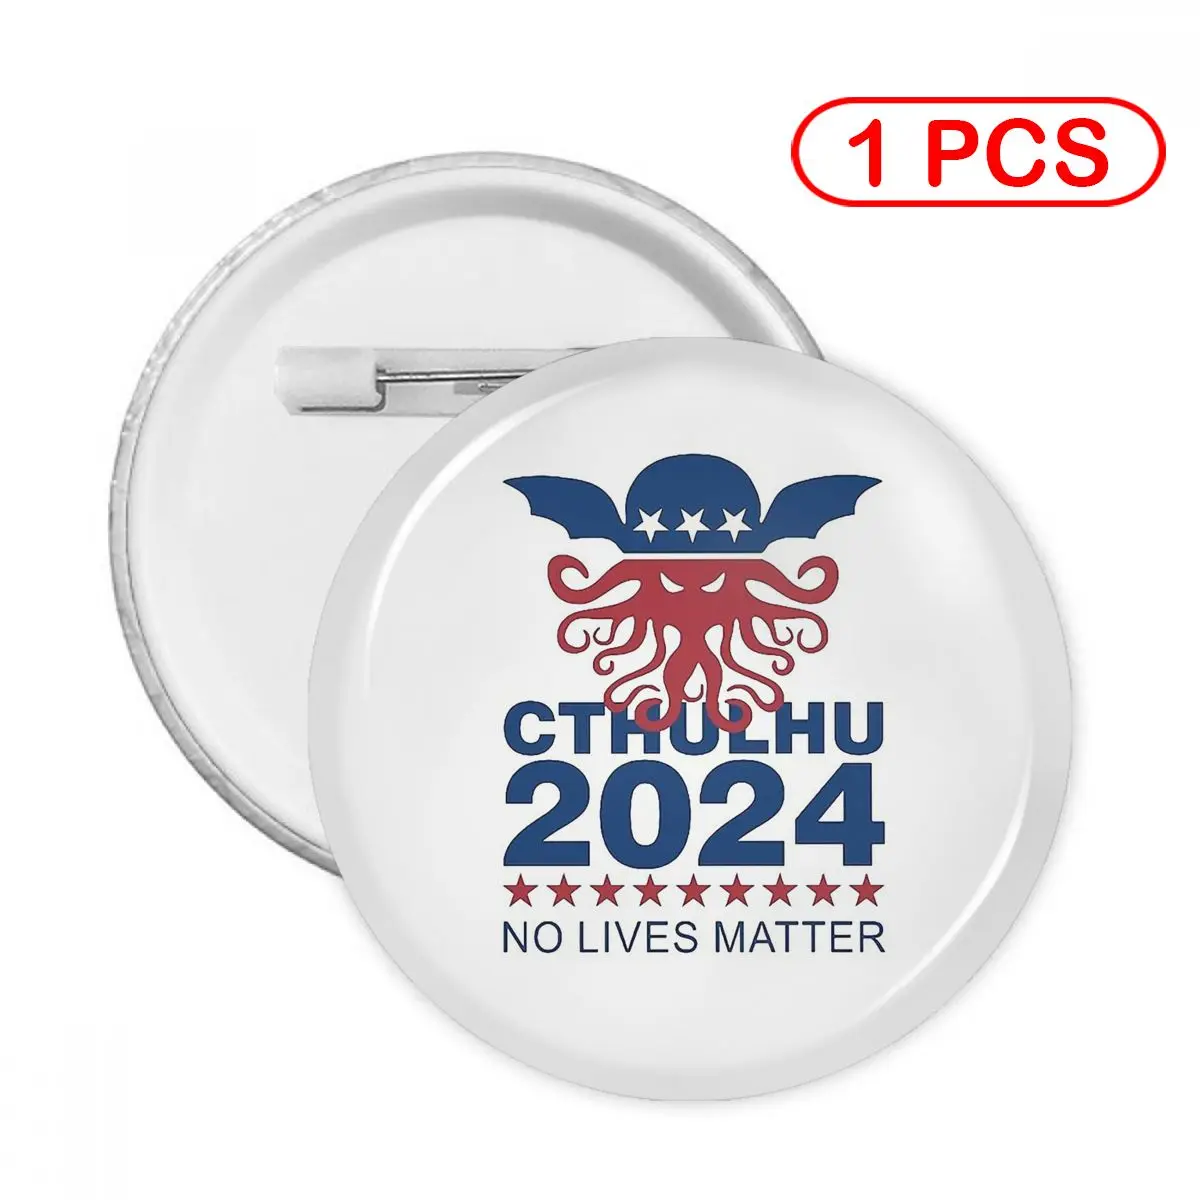 Soft Button Pin Clothes Brooch Creative Pins Jewelry Decor Cute Badge Cthulhu 2024 No Lives Matter Women Child Lapel